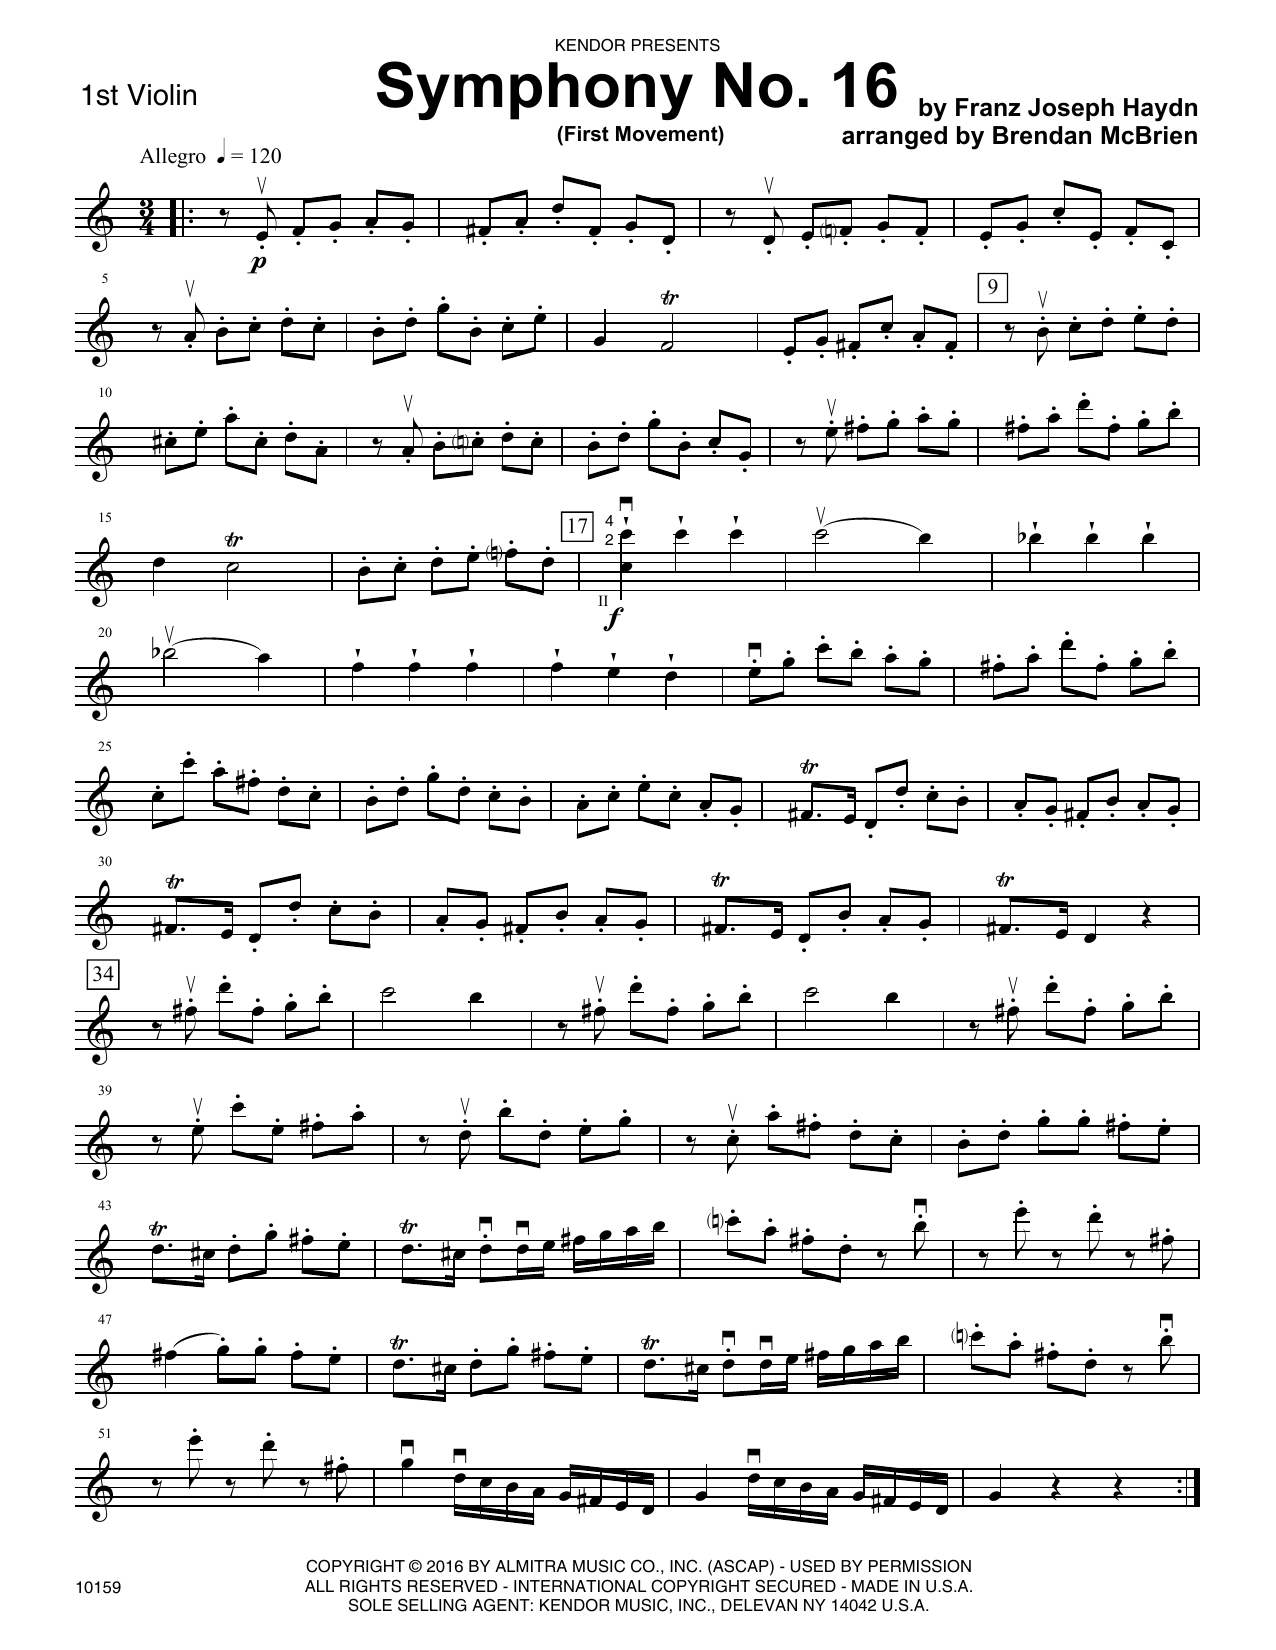 Download Brian McBrien Symphony No. 16 (First Movement) - 1st Sheet Music